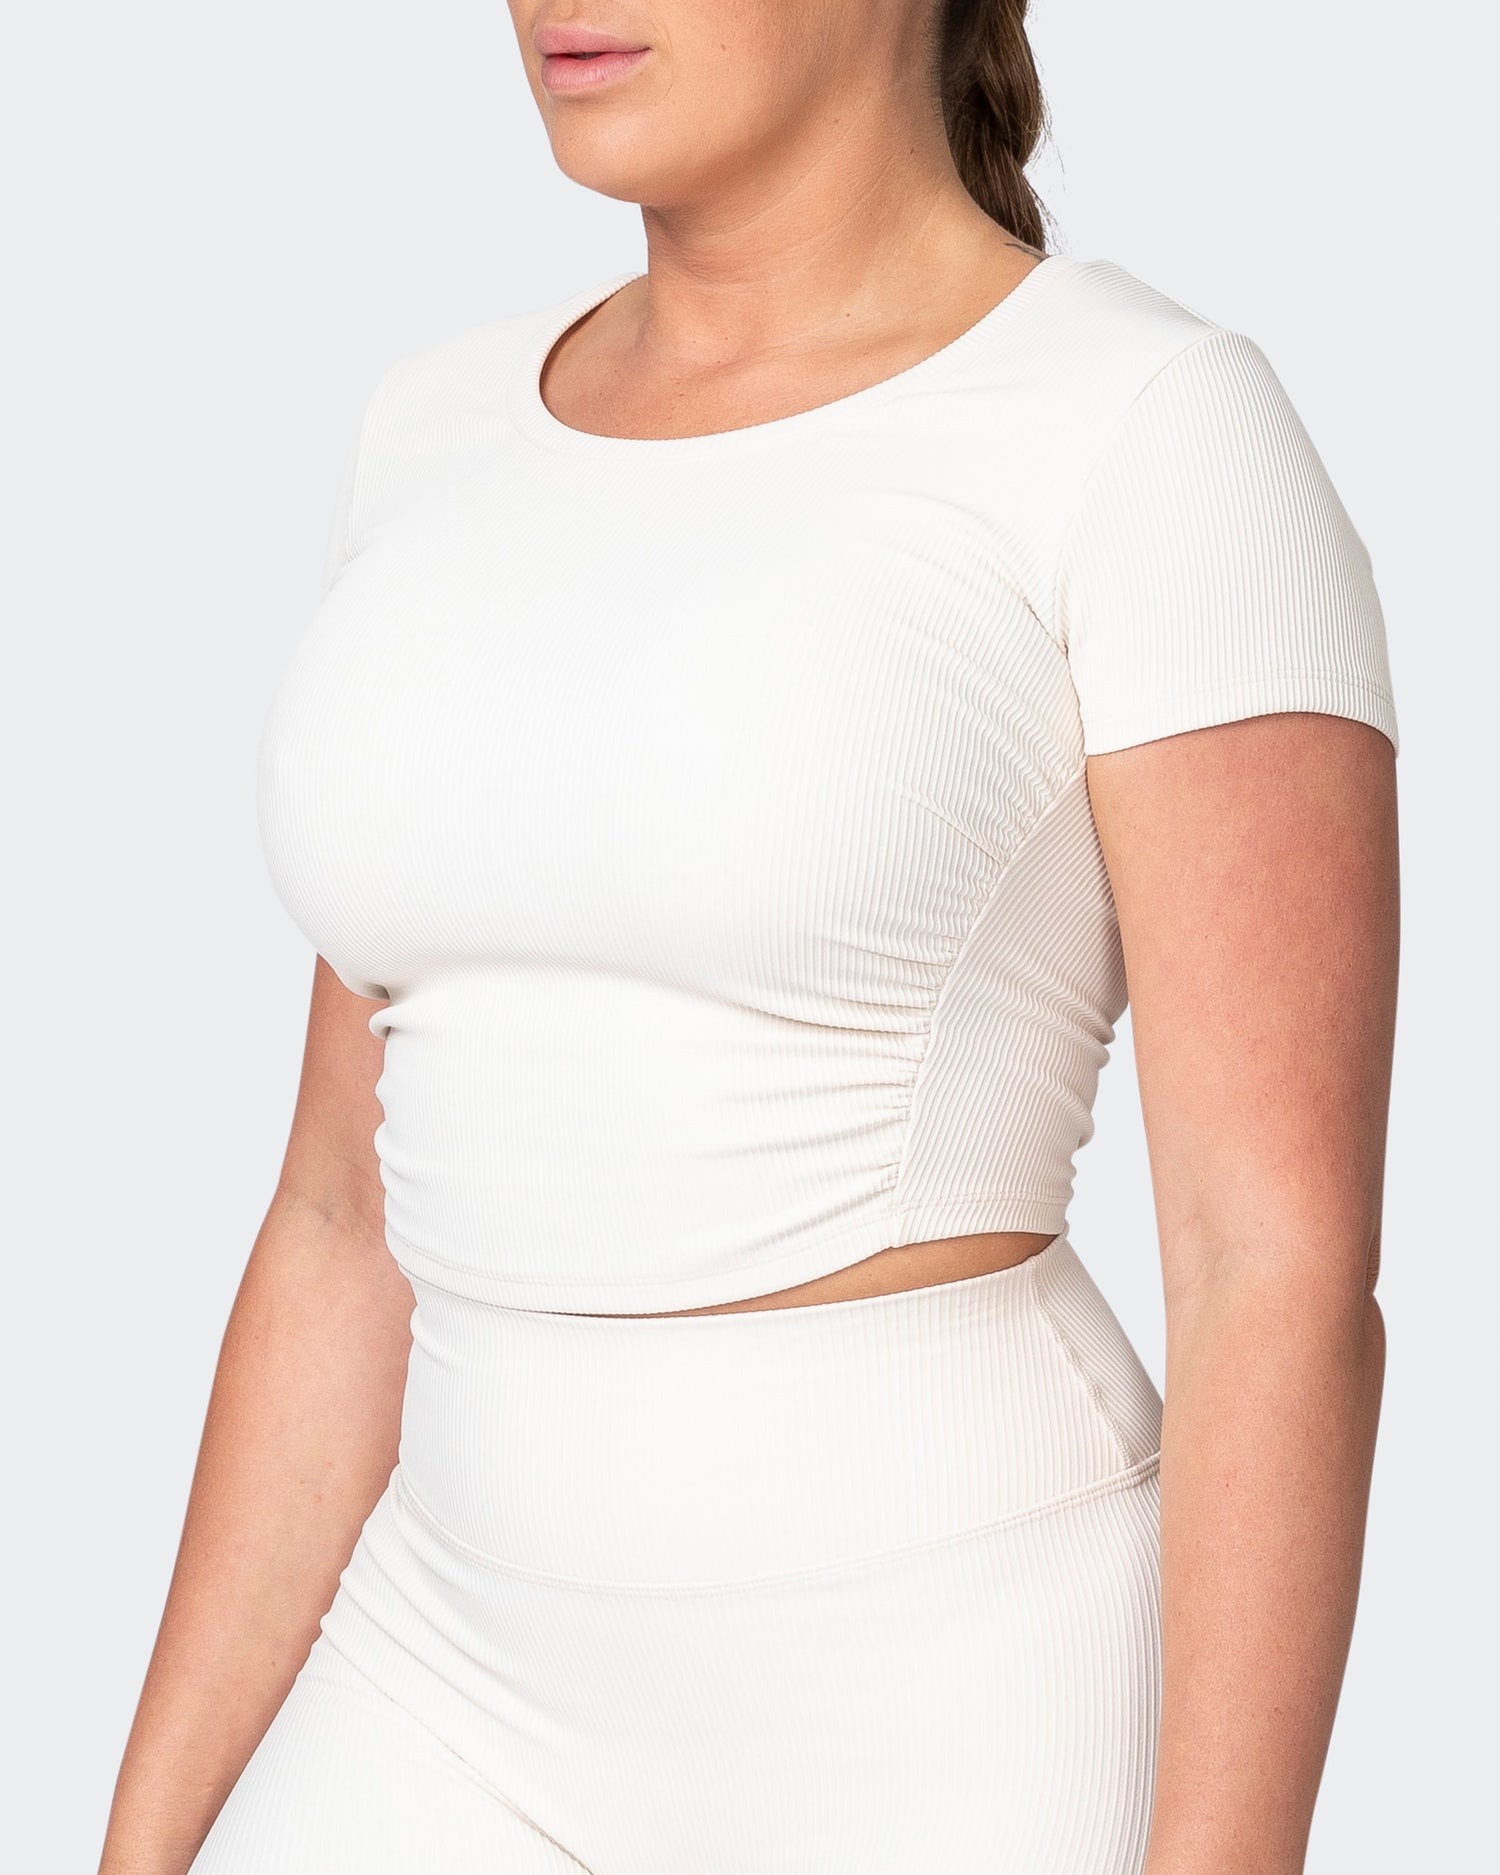 Rival Cropped Rib Top - Dew